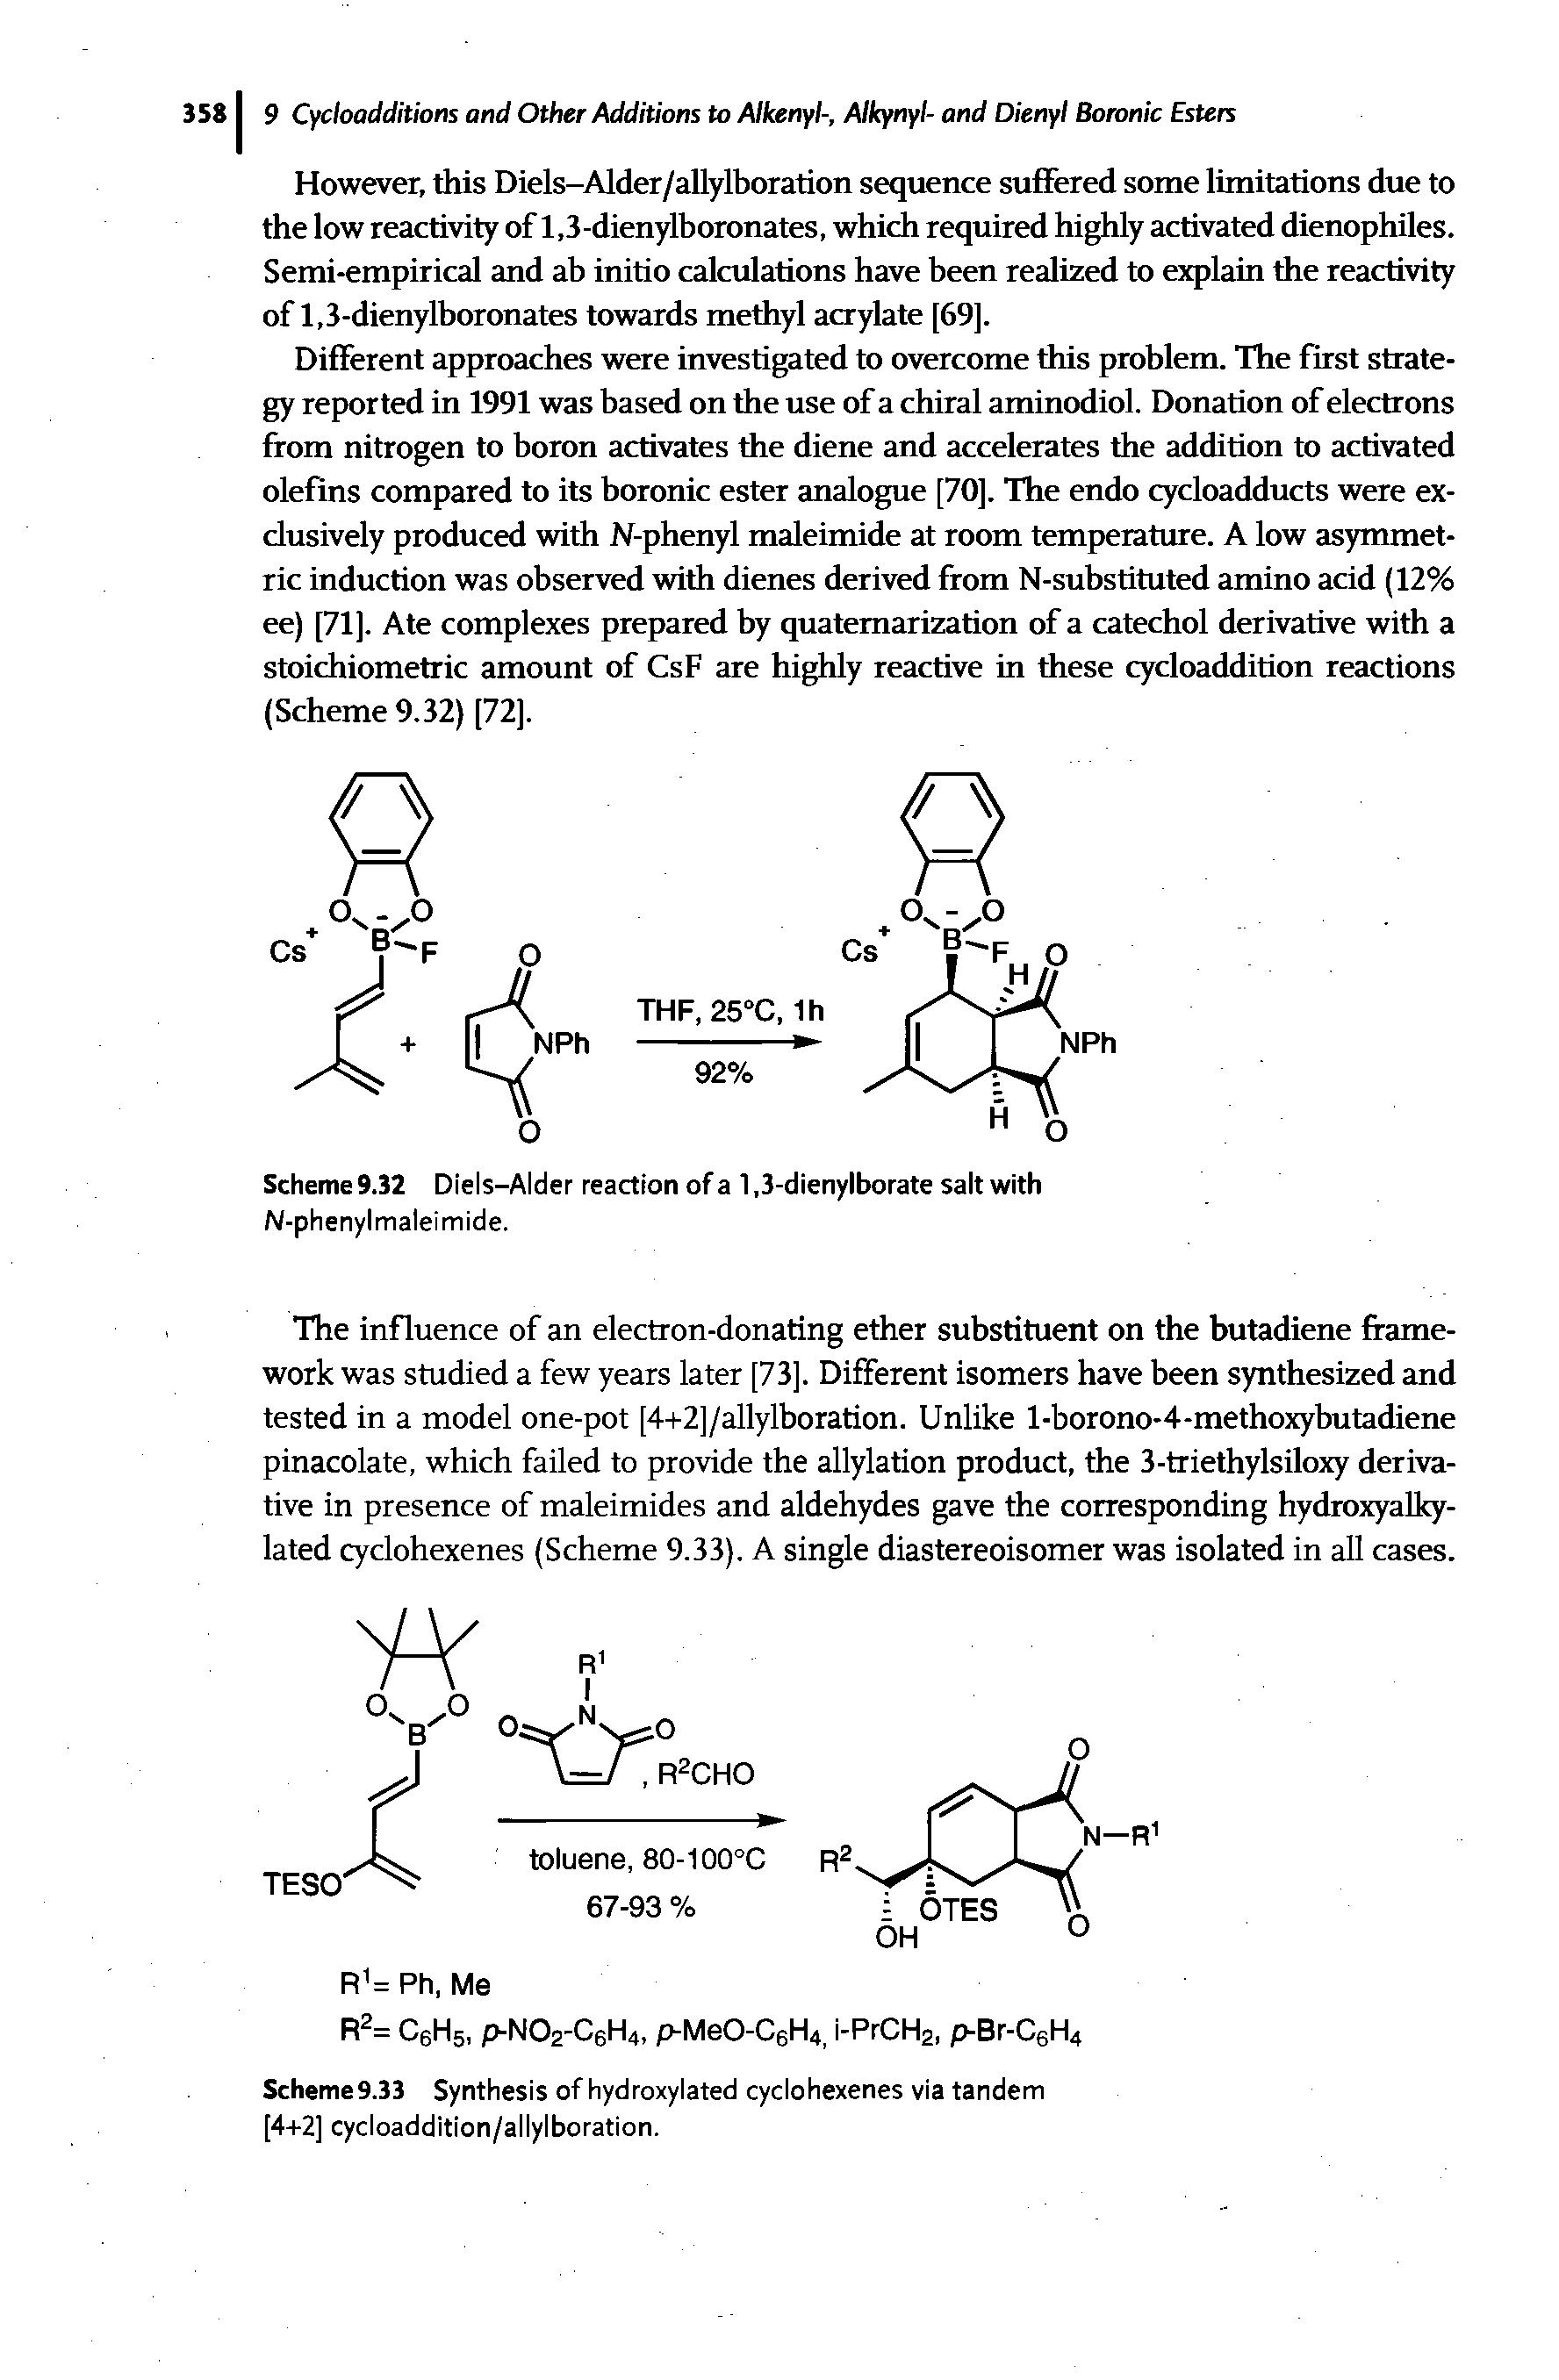 Scheme9.33 Synthesis of hydroxylated cyclohexenes via tandem [4+2] cycloaddition/allylboration.